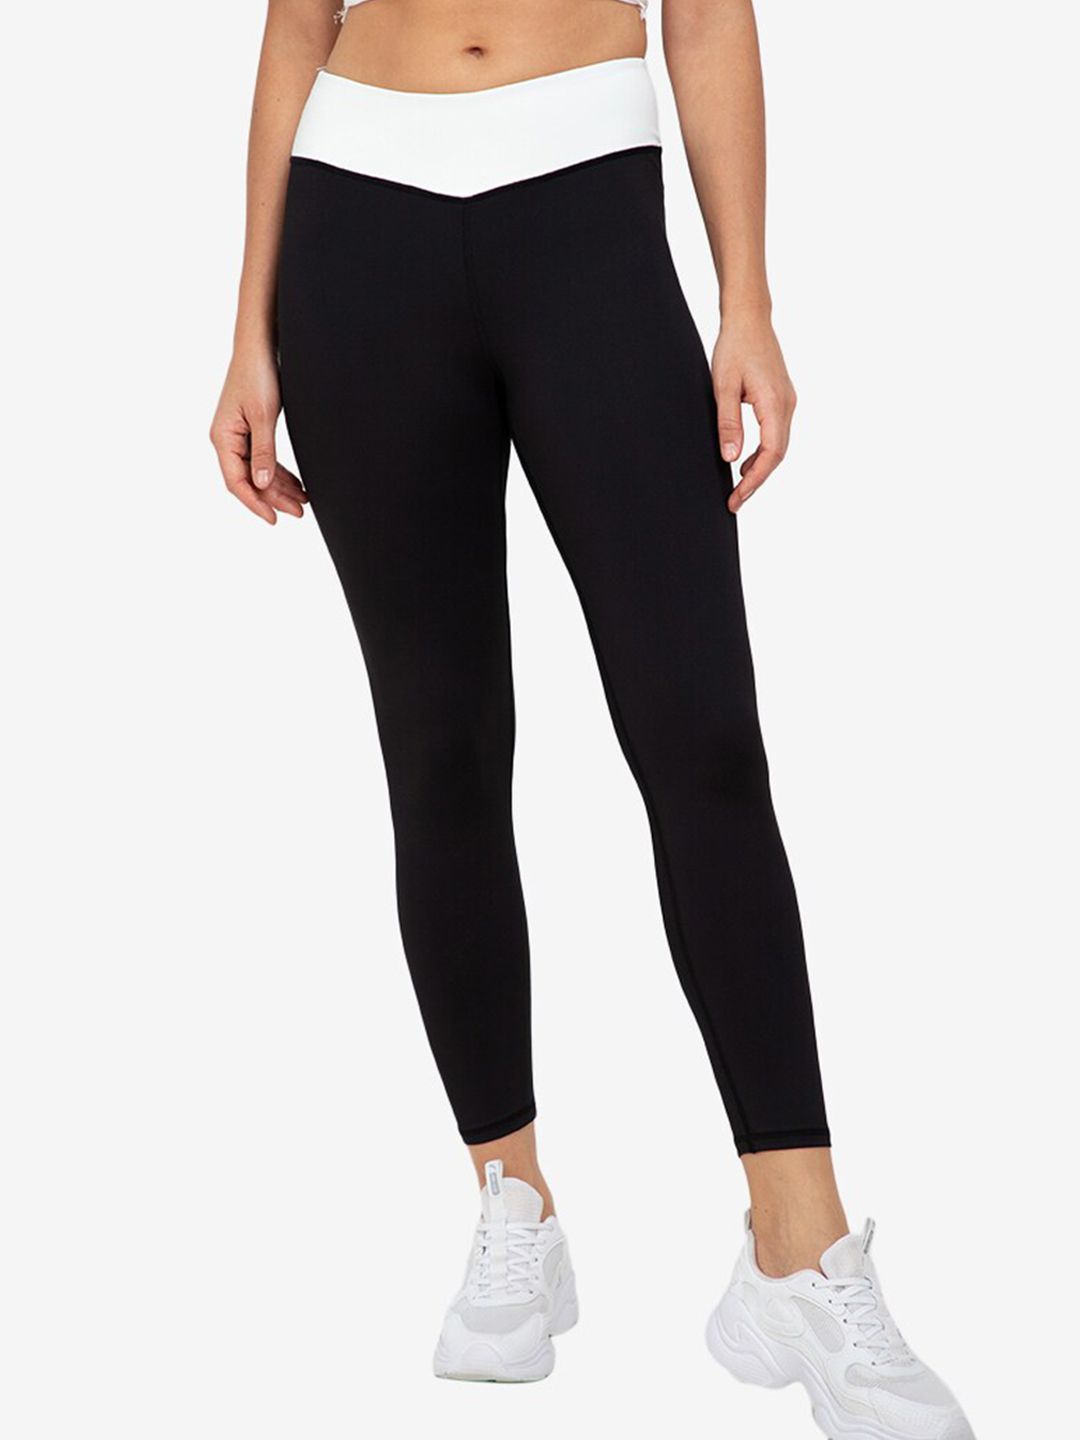 ZALORA ACTIVE Women Black Tights With V Front Band Details Price in India